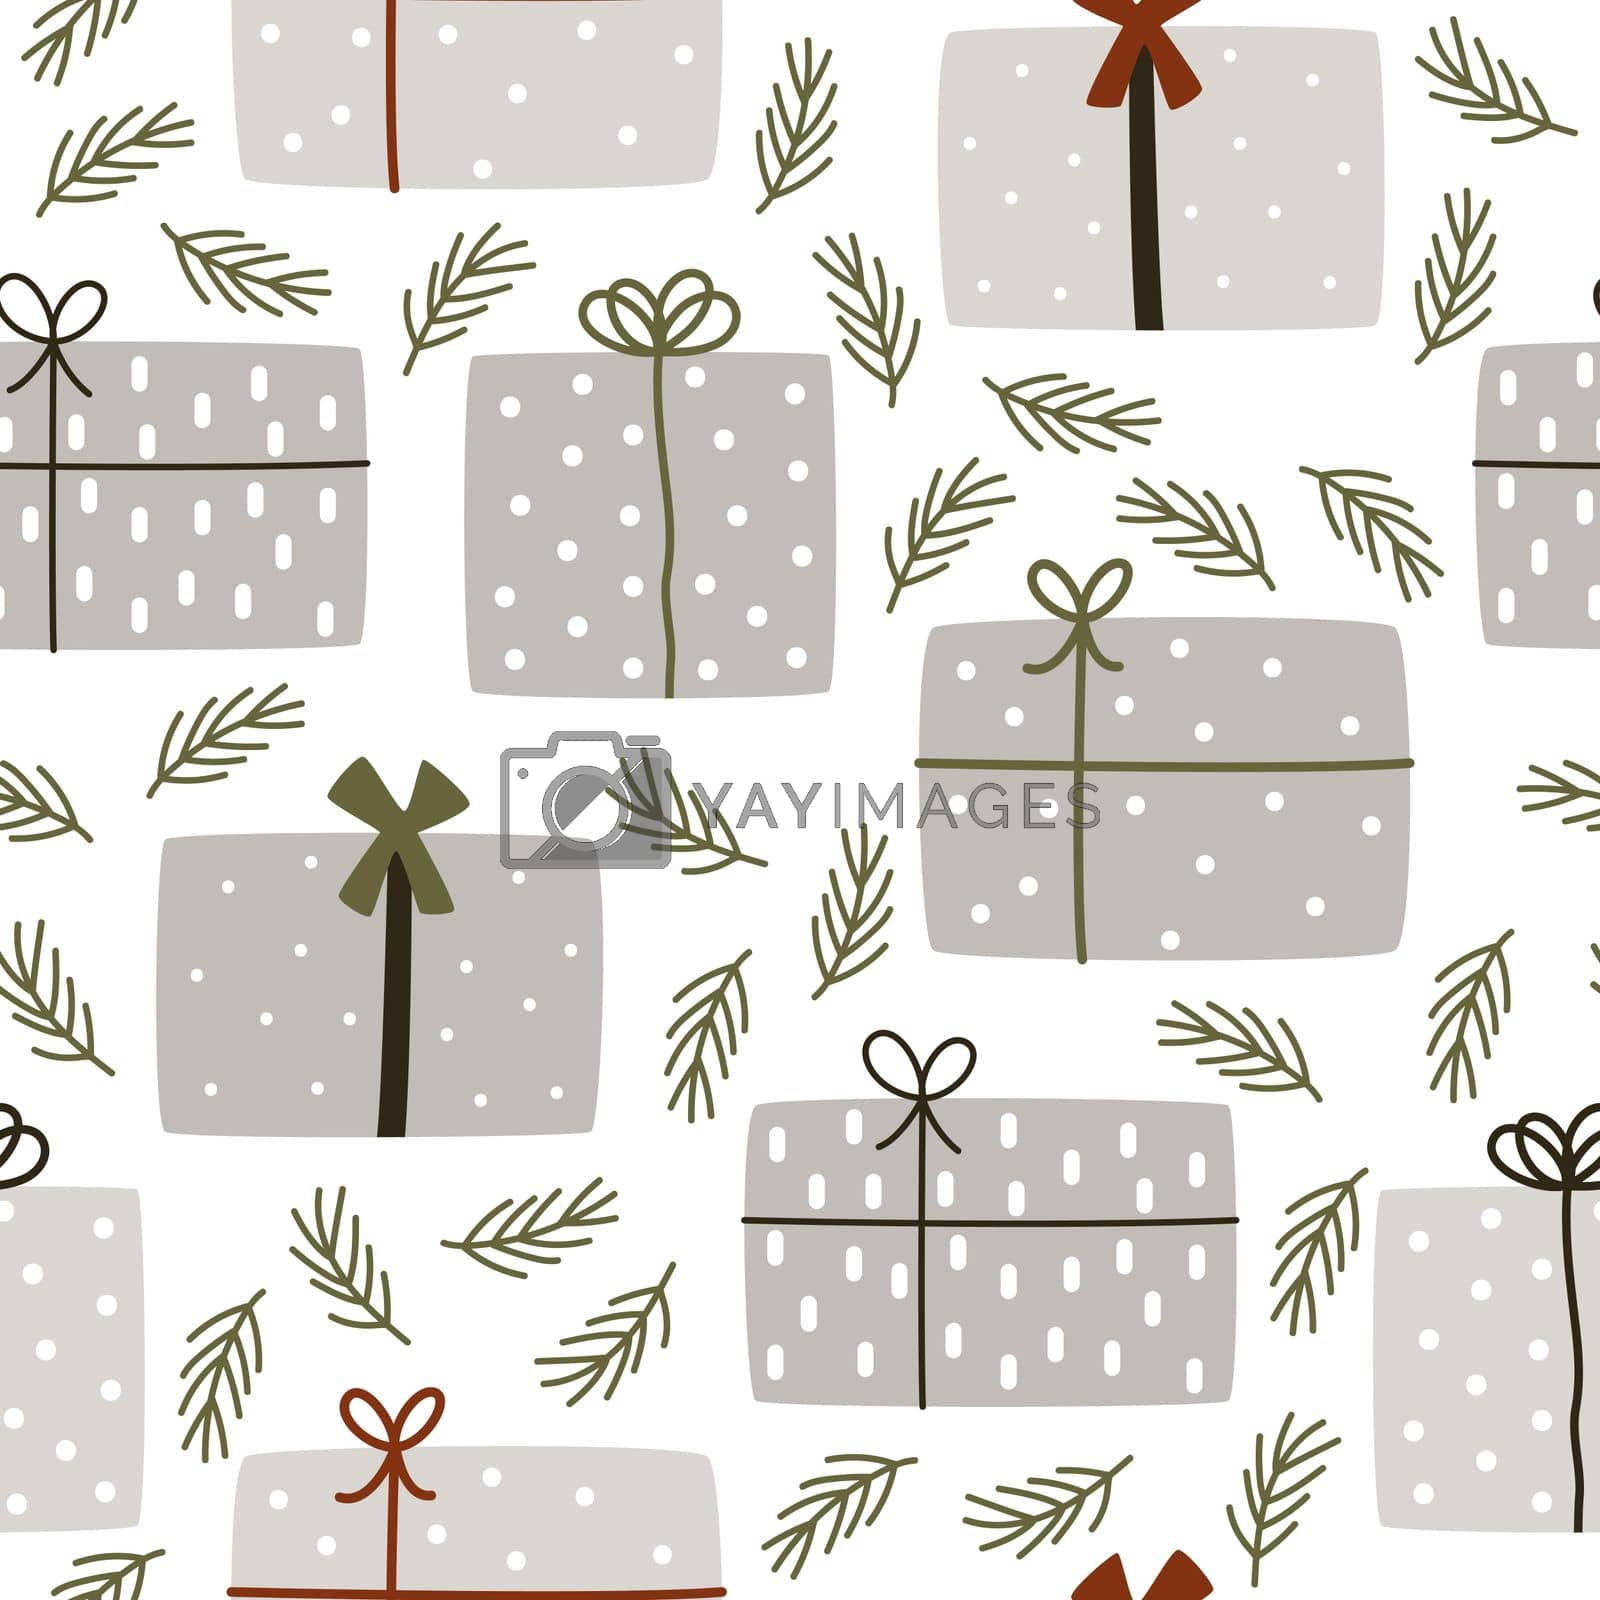 Royalty free image of White gift boxes on gray background for party celebration by lera_feeva